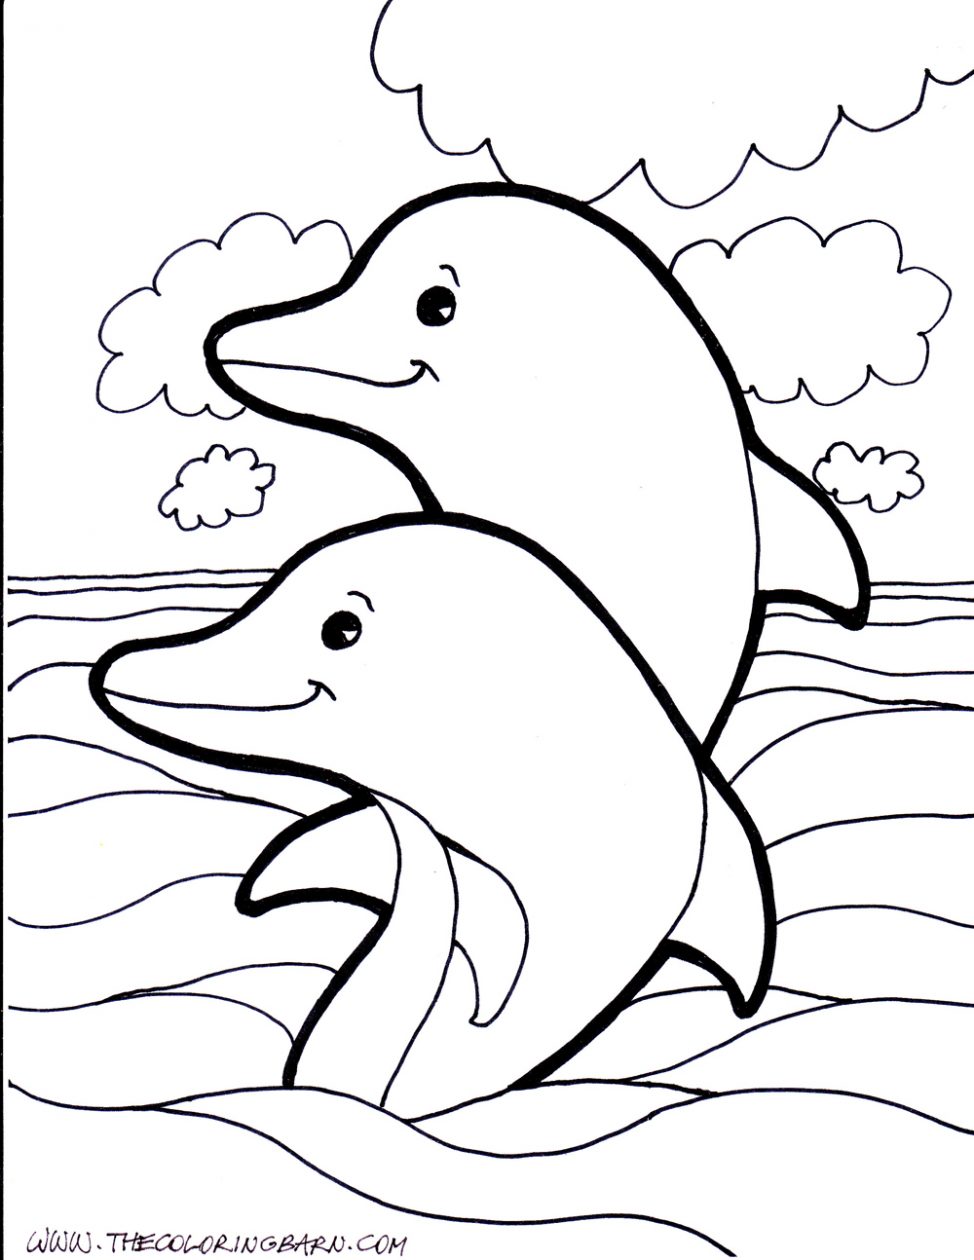 Miami Dolphins Coloring Pages at GetDrawings | Free download